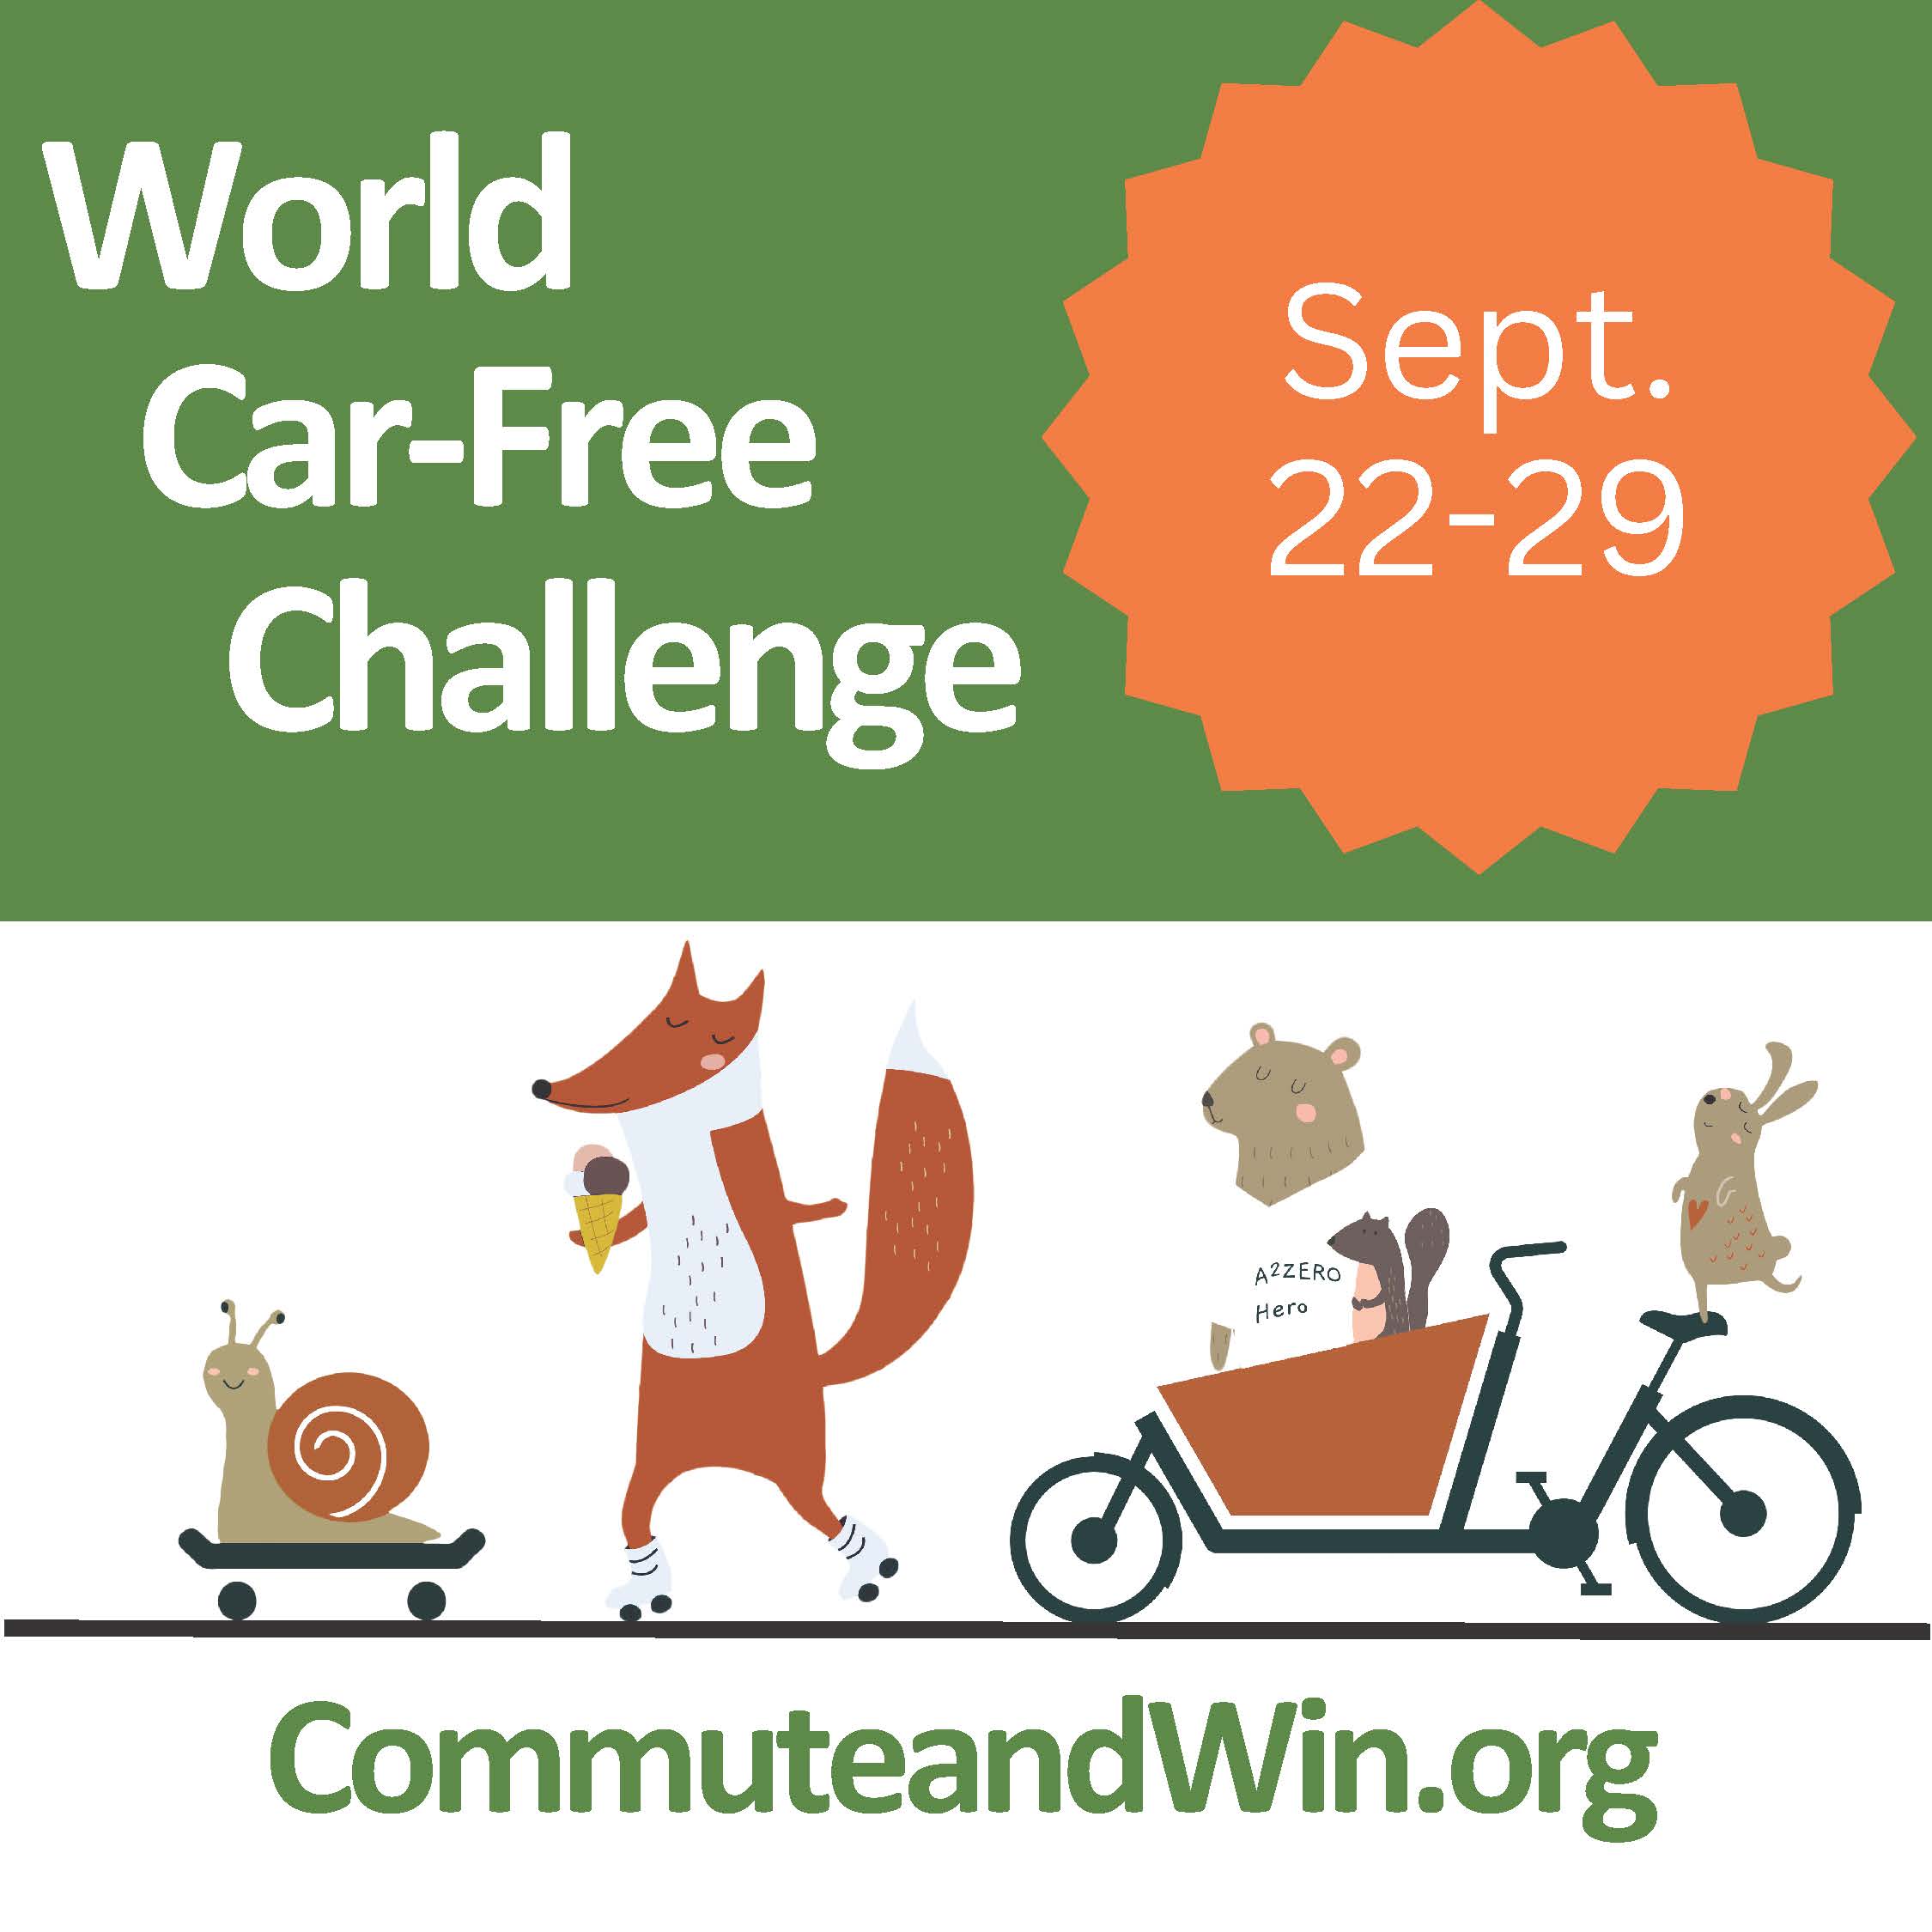 World Car-free Challenge Sept. 22-29. Snail on skateboard, rollerskating fox and several animals using a cargo bike parade in the center of image. Commuteandwin.org displayed on bottom.